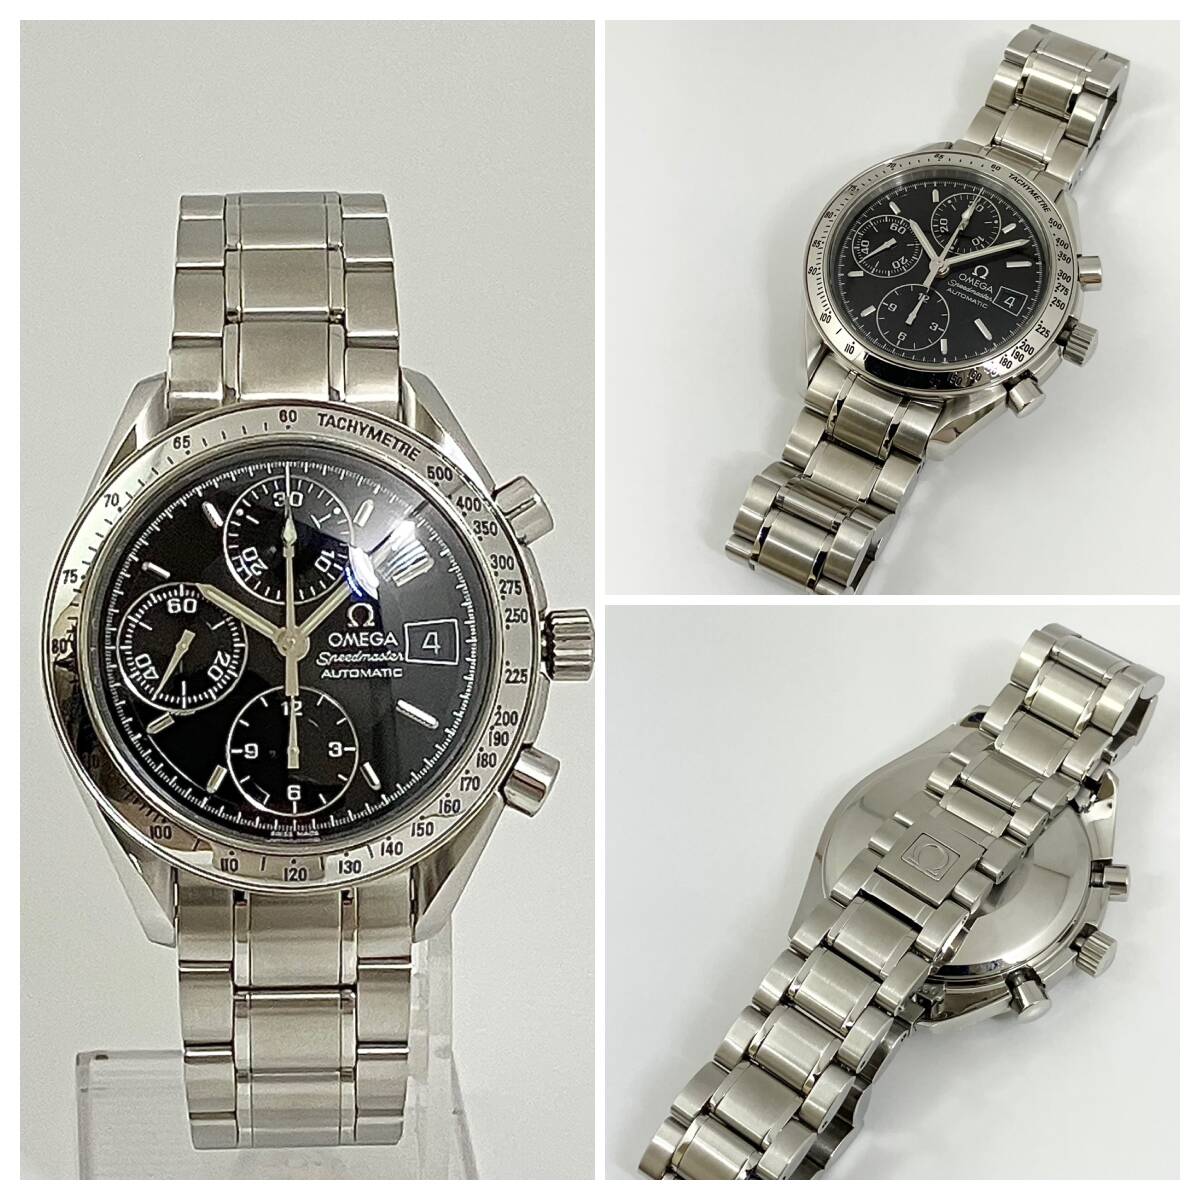  accessory, belt 2 kind attaching *OH ending ultimate beautiful goods. Omega clock * Speedmaster * Date *3513-50*